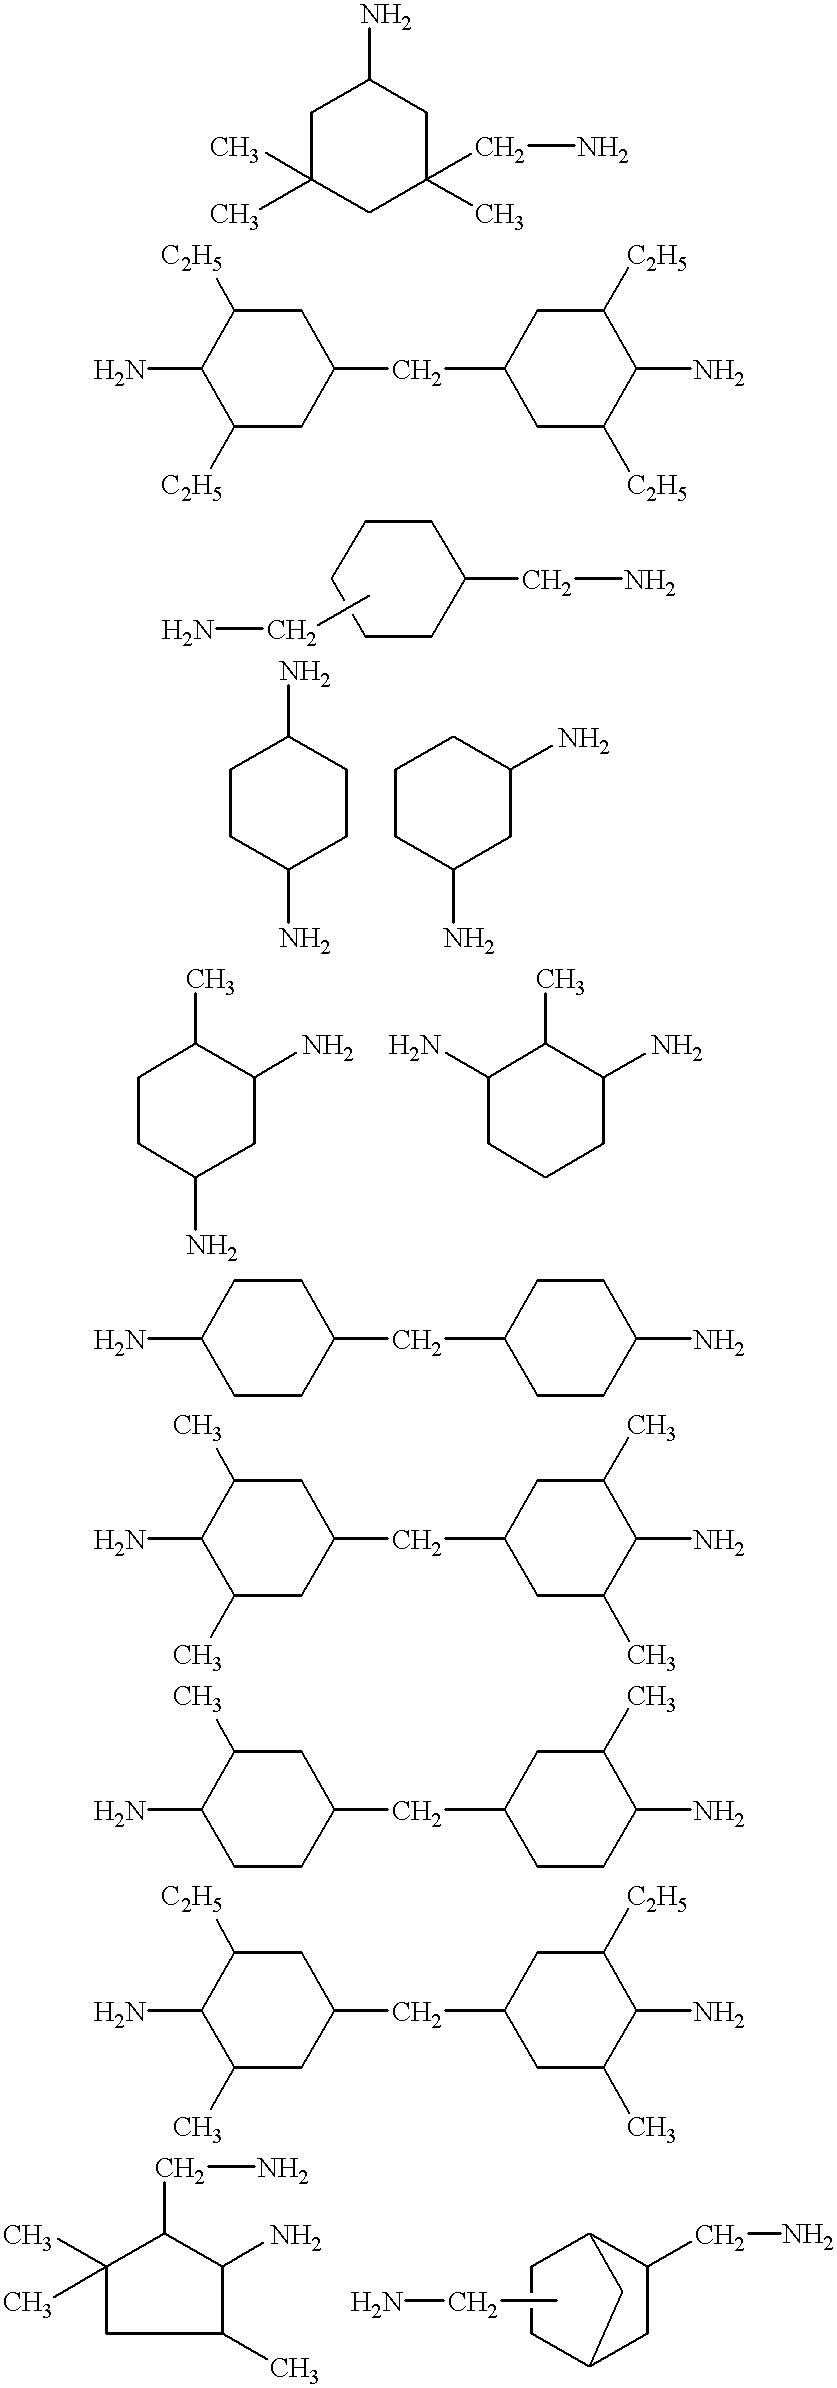 Curable compositions comprising acetoacetoxy and imine functionality